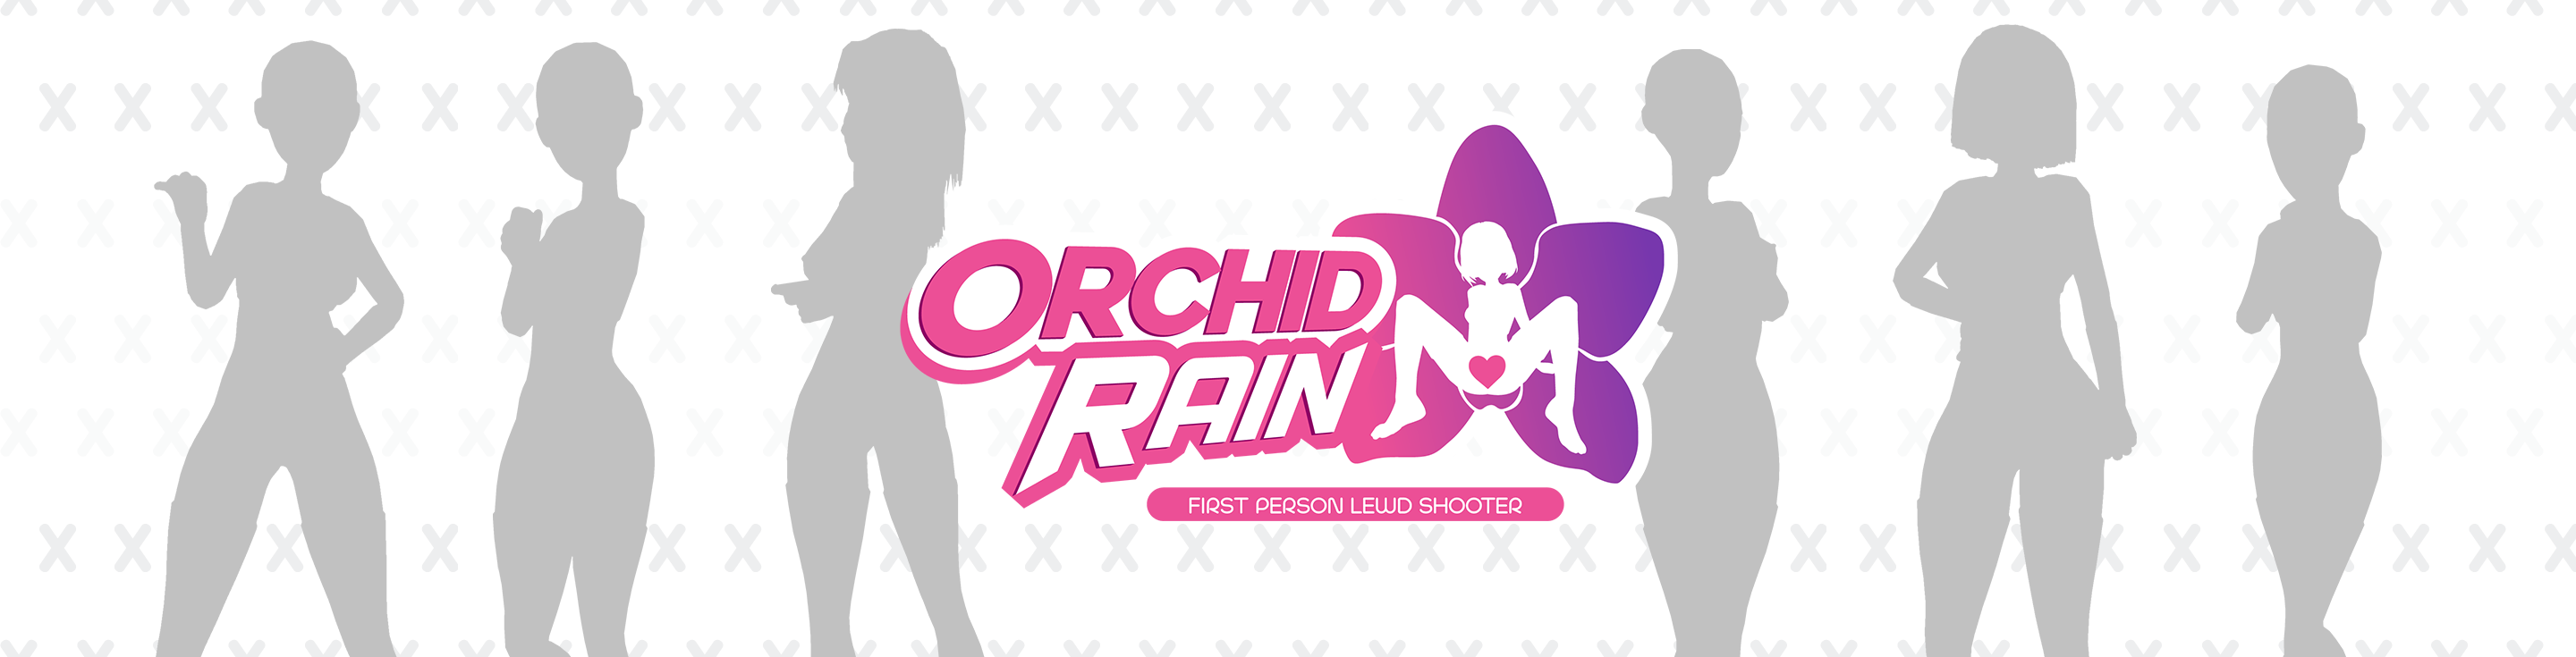 Orchid Rain - Mission 04 build (outdated)